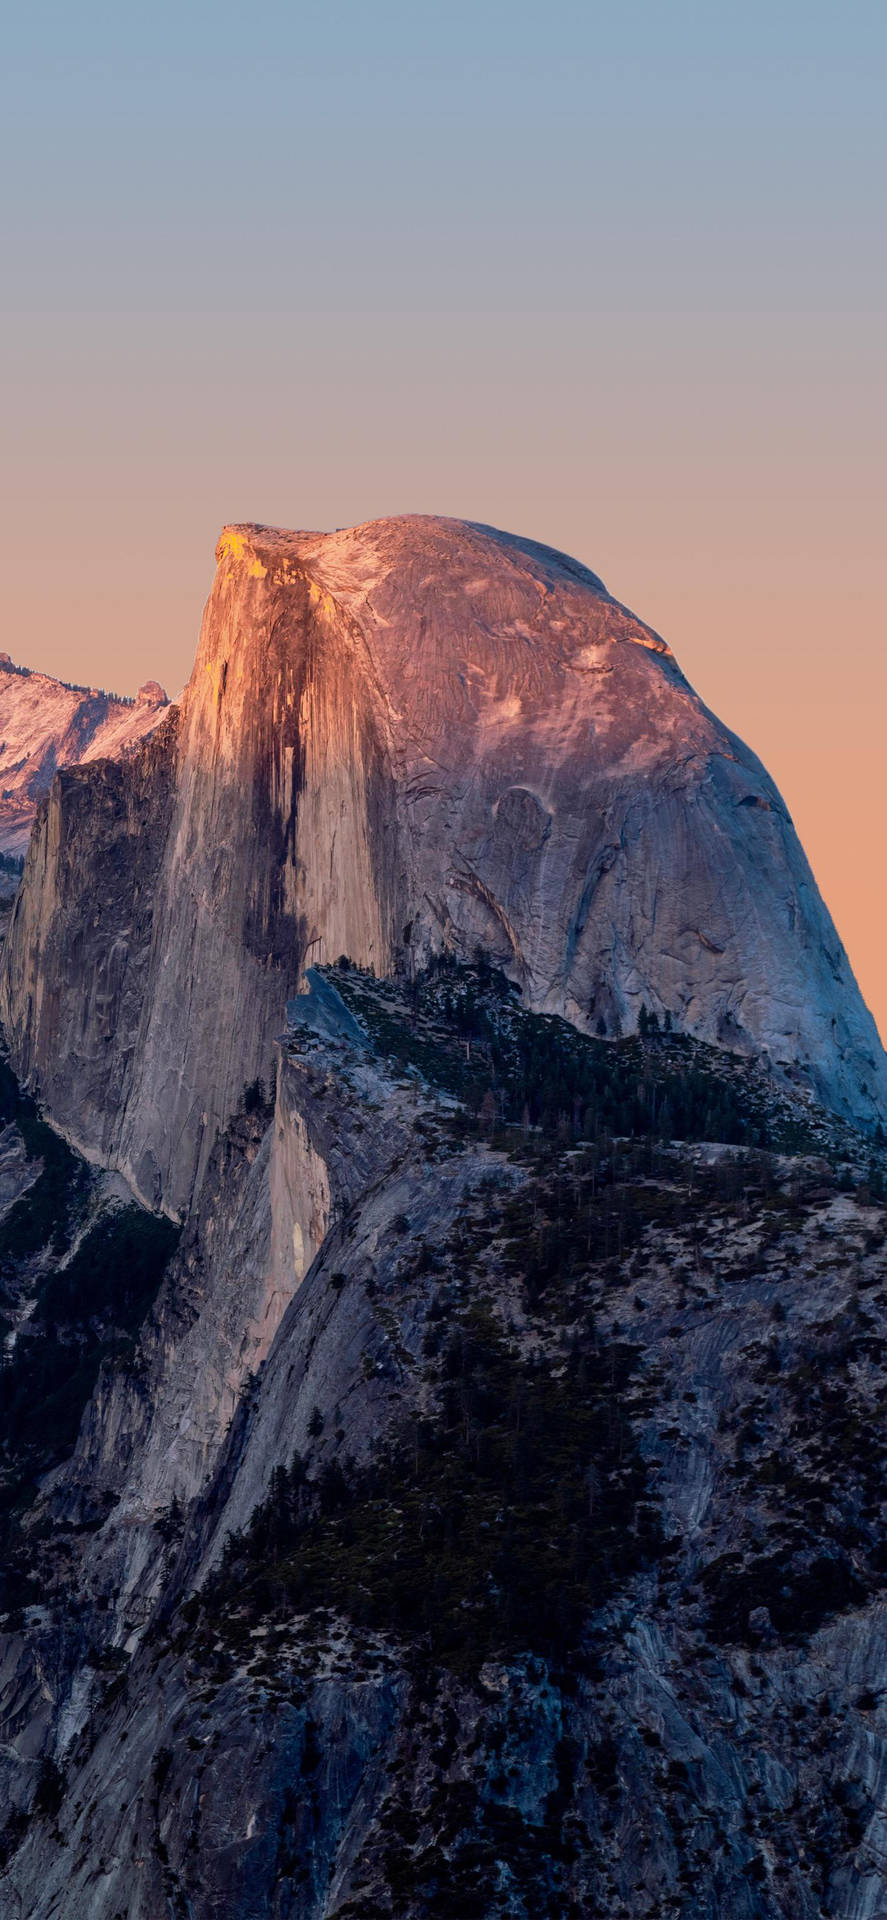 Enjoy the beauty of Yosemite National Park with the newest iPhone Wallpaper